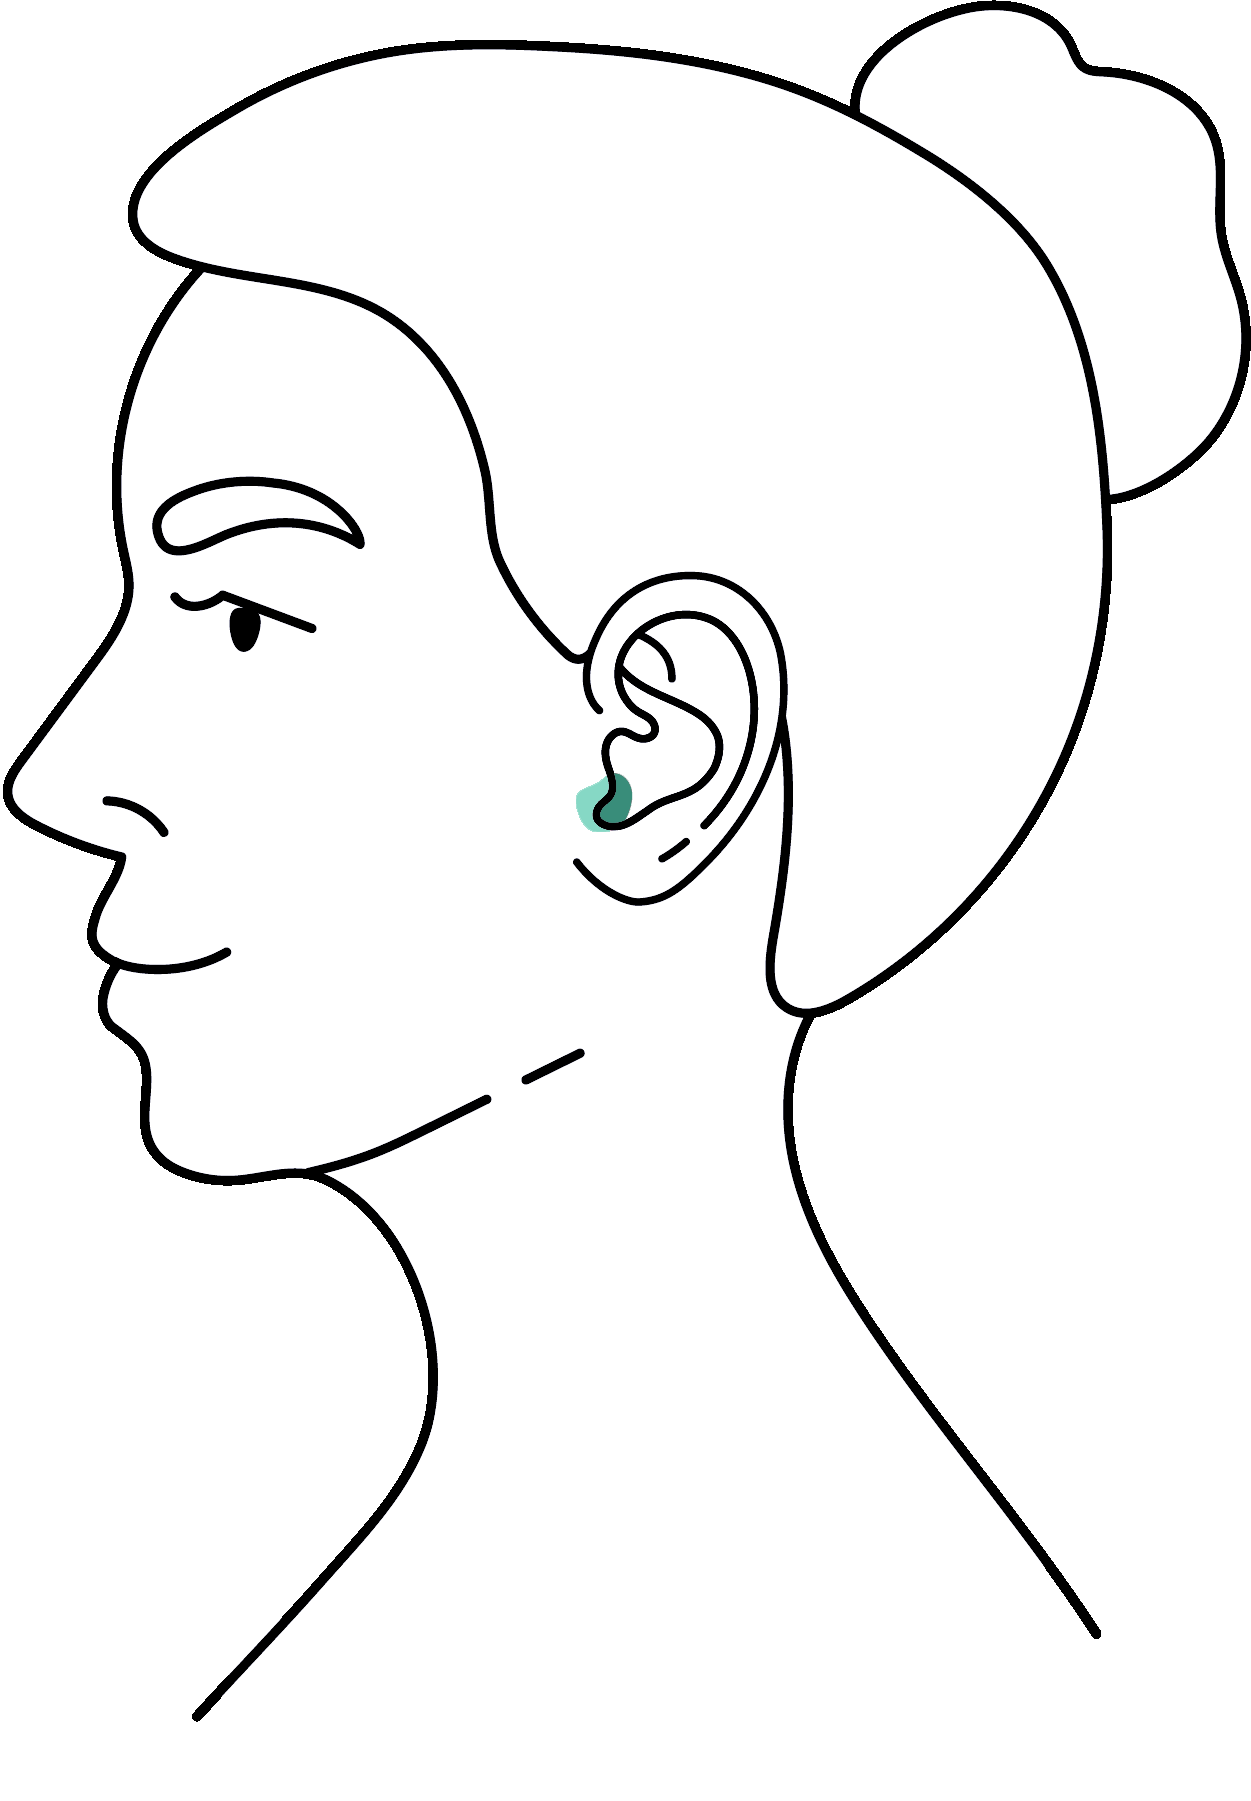 hearing aid icon in ear